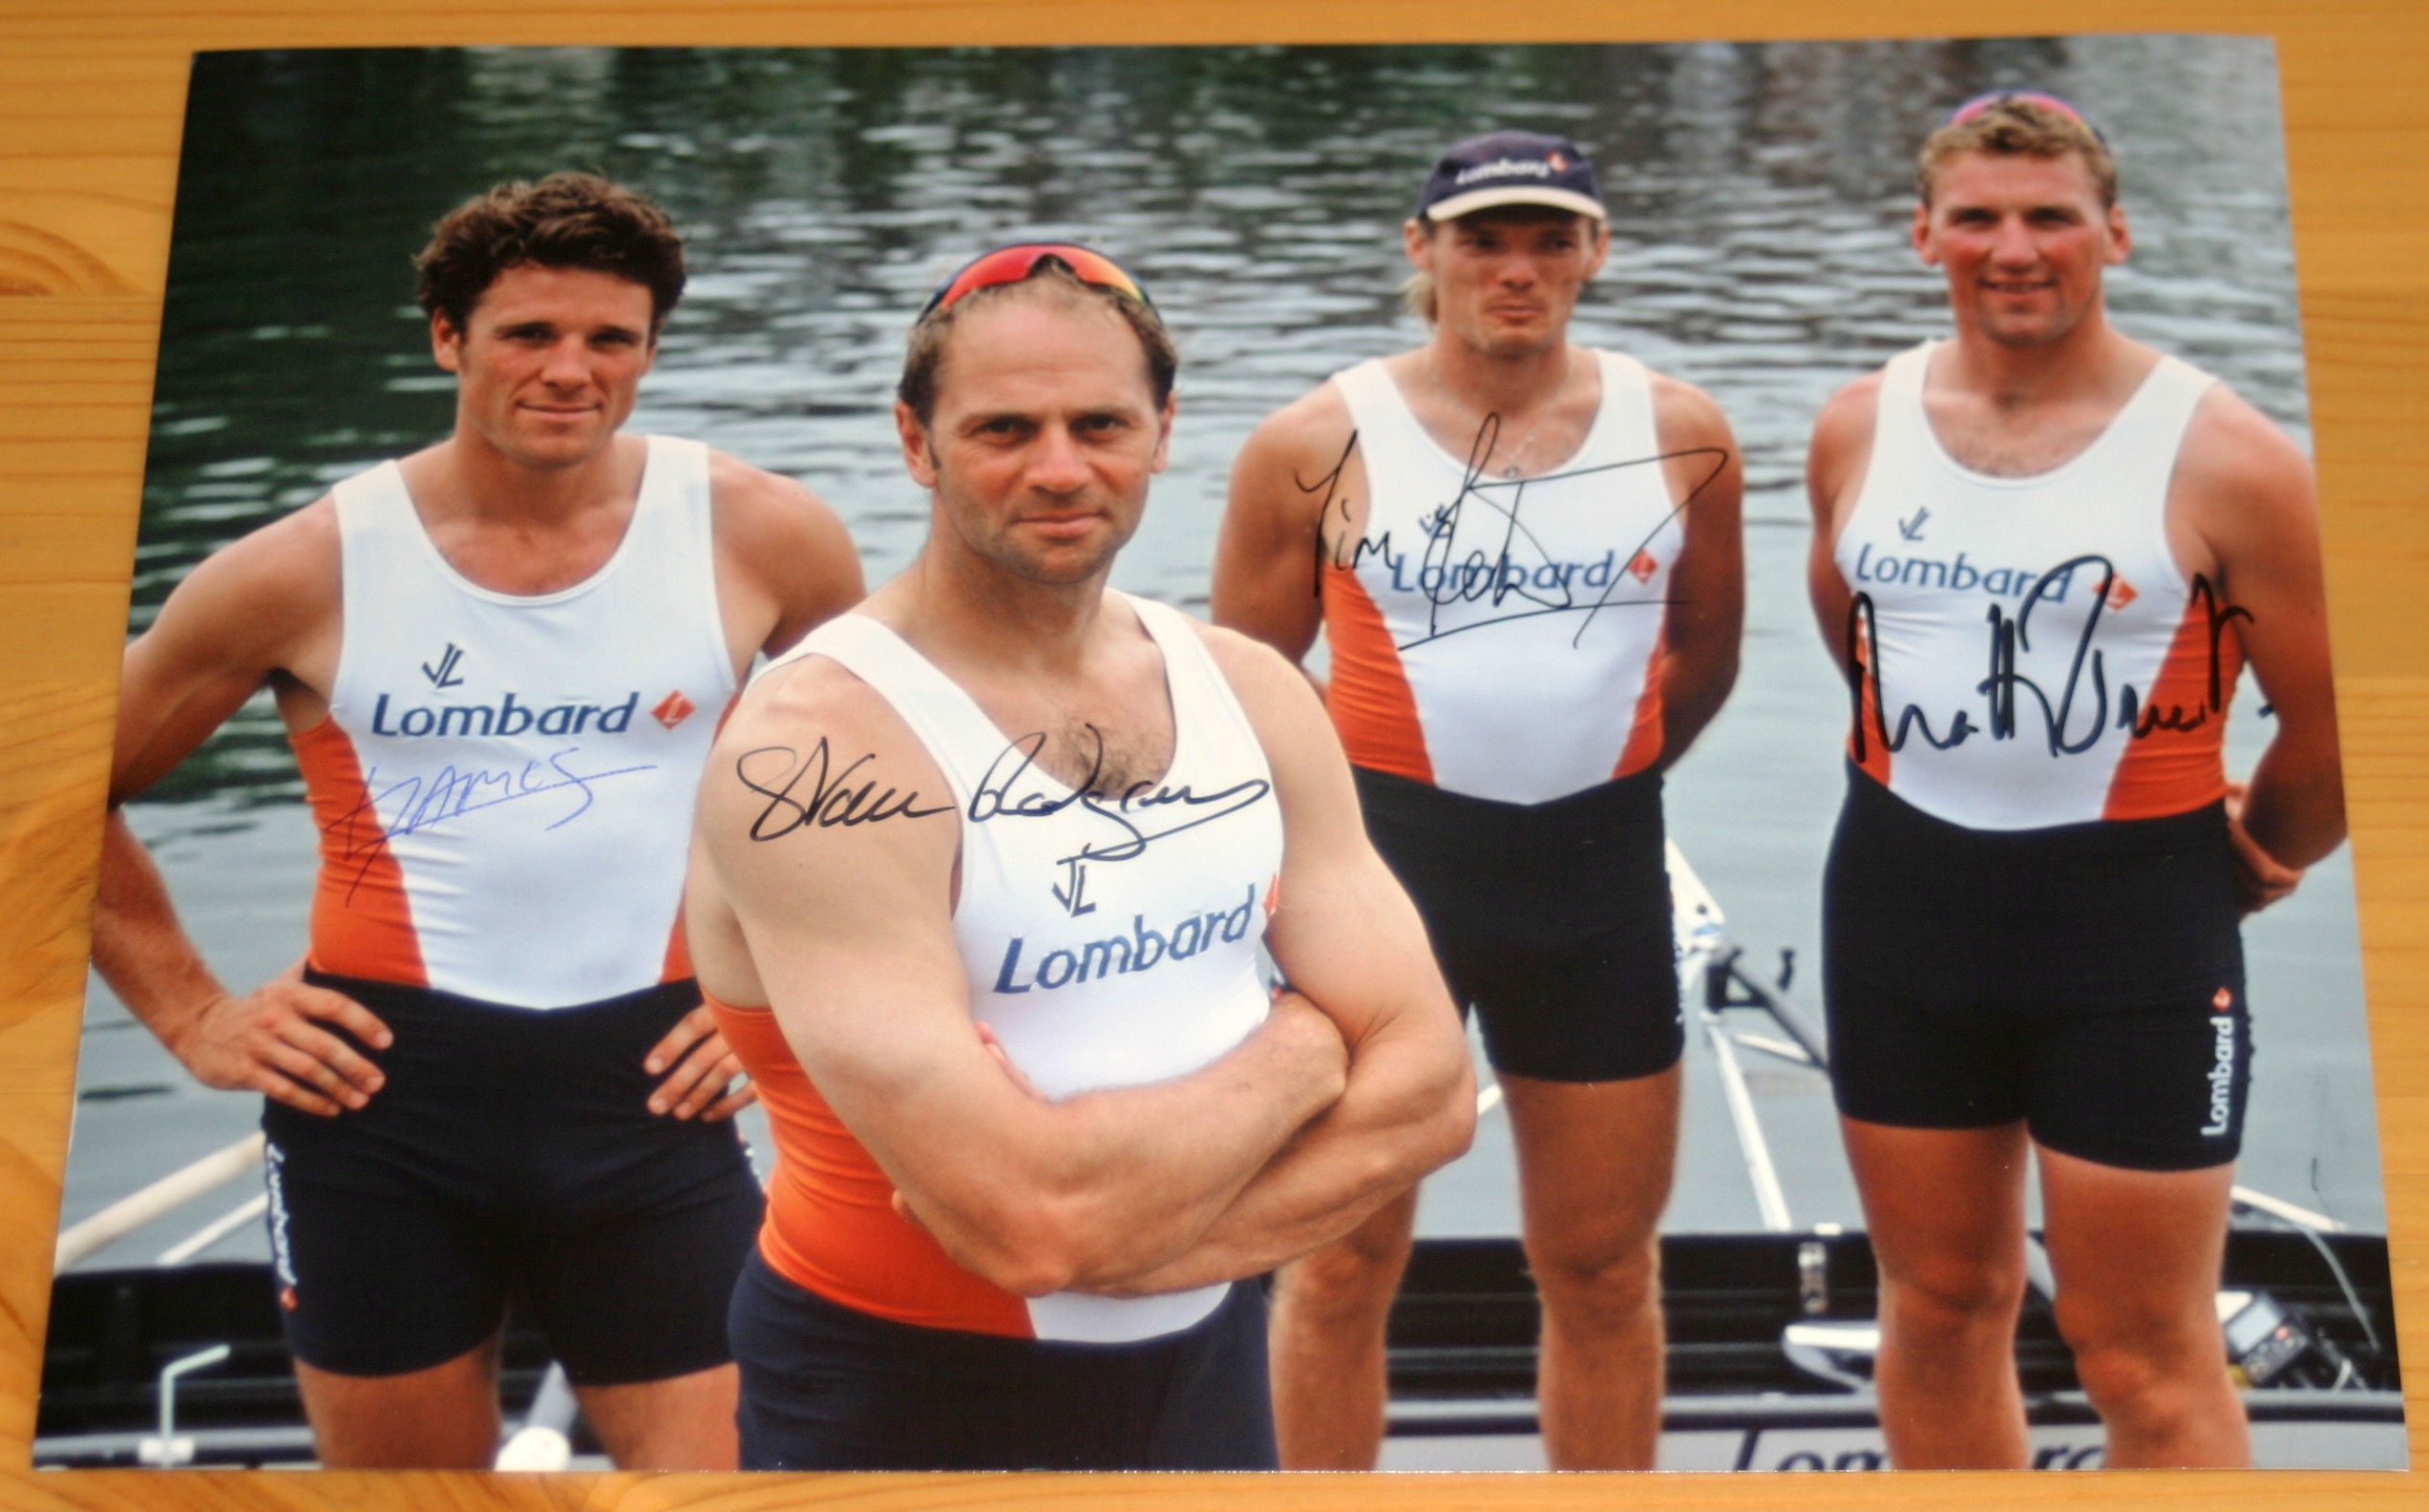 2000 GOLD - COXLESS FOURS - SIGNED BY ALL 4